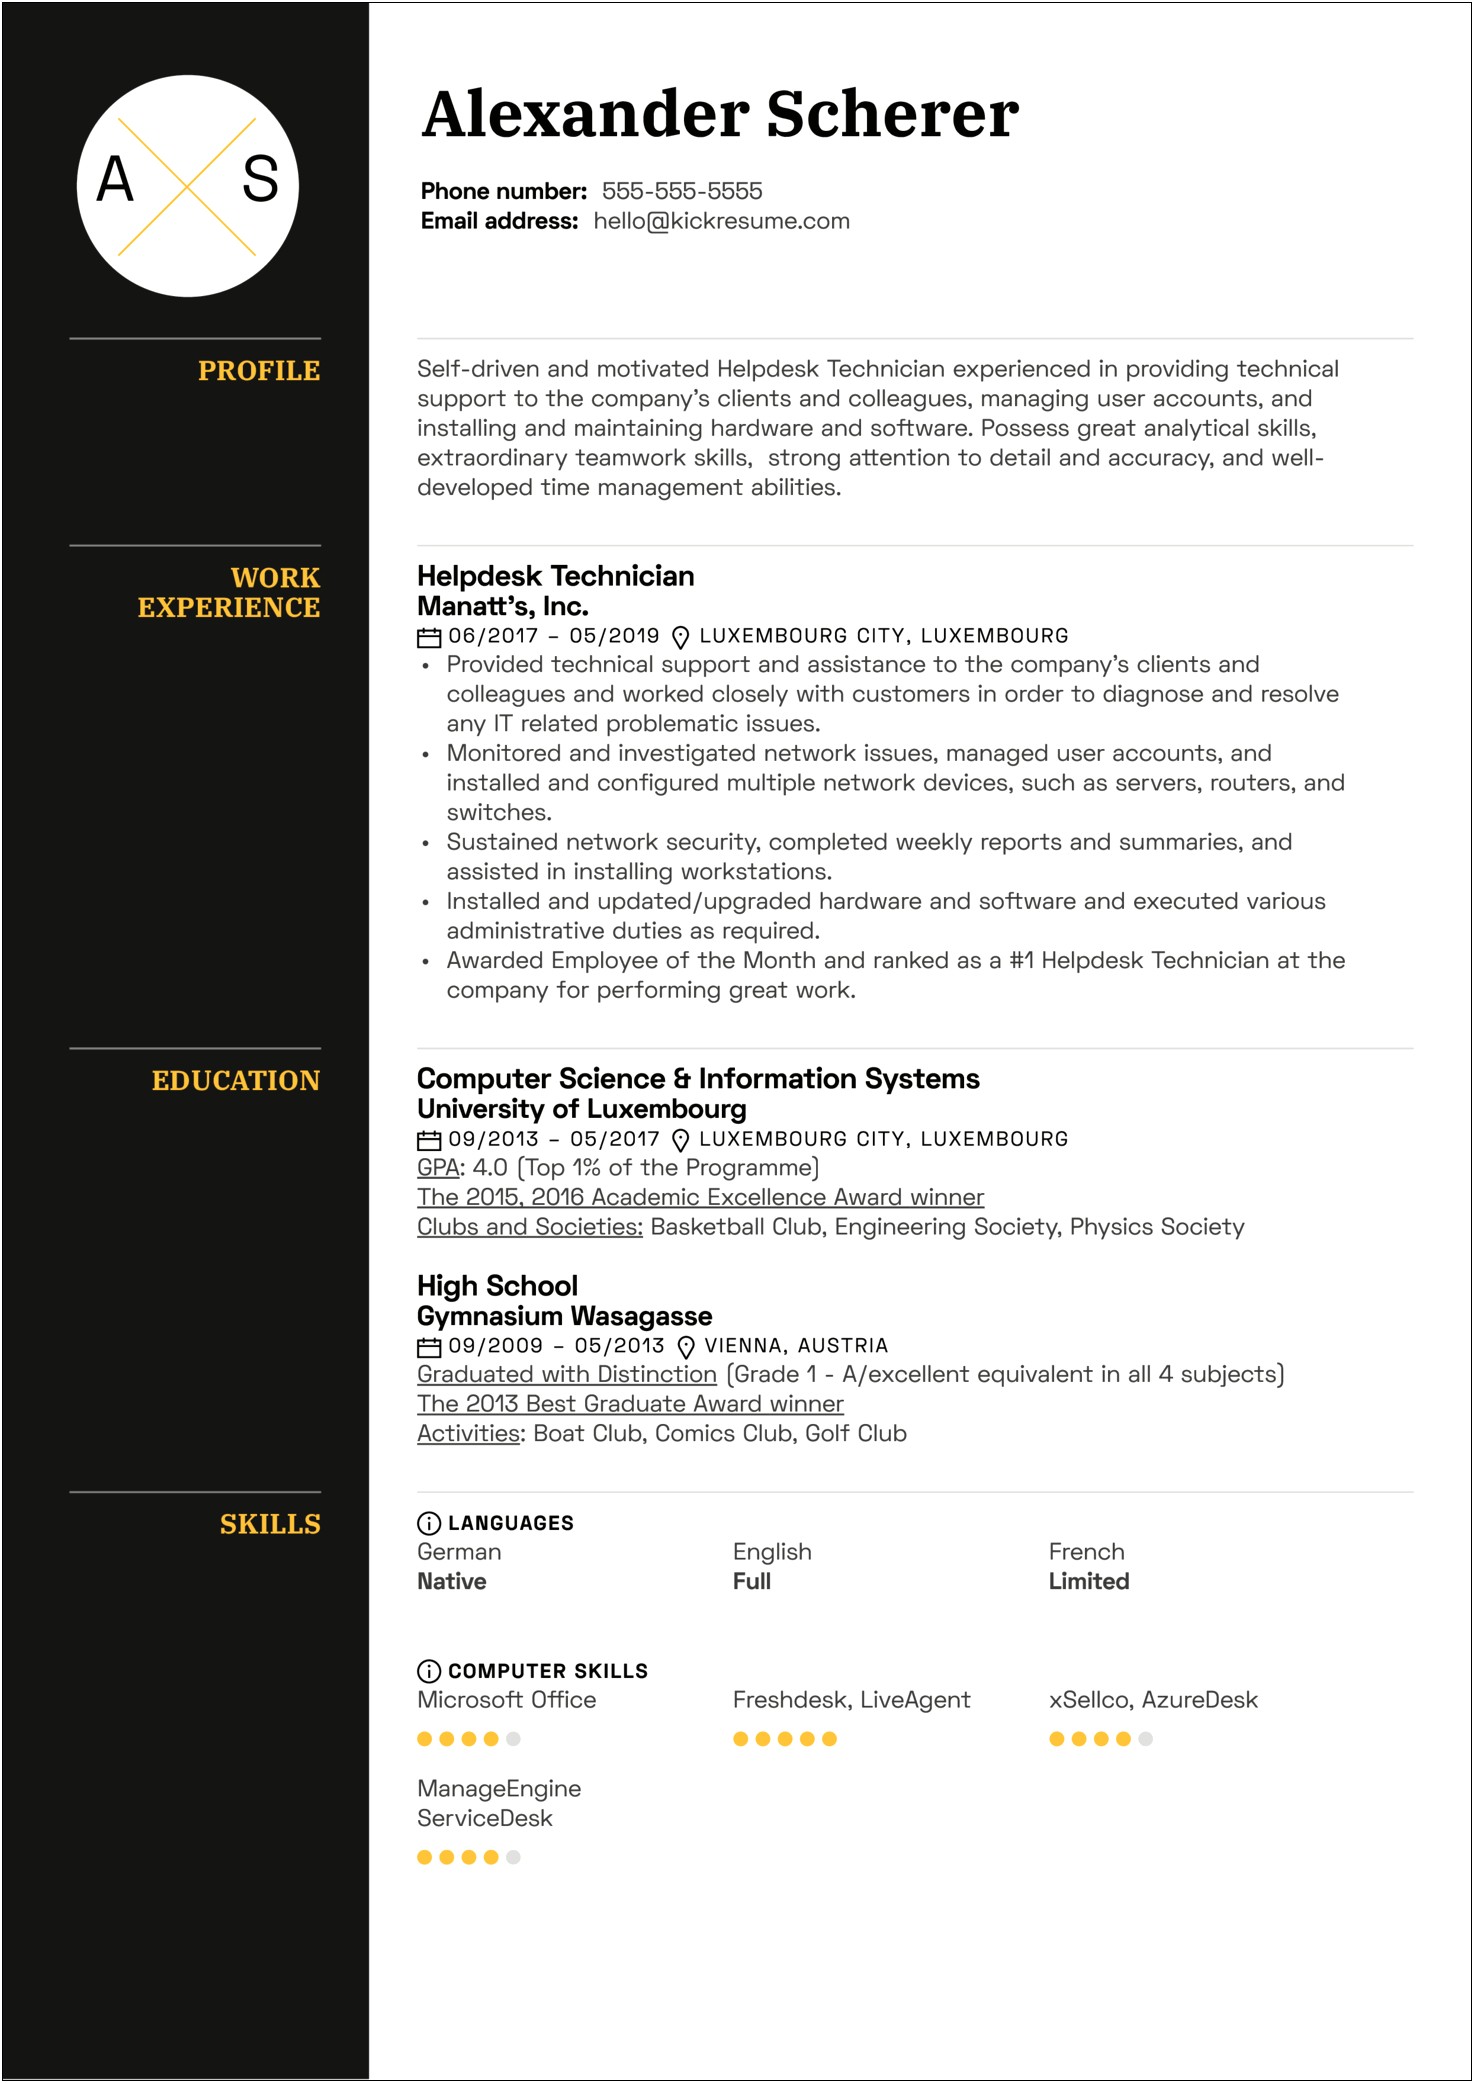 Resume Objective For Computer Repair Shop